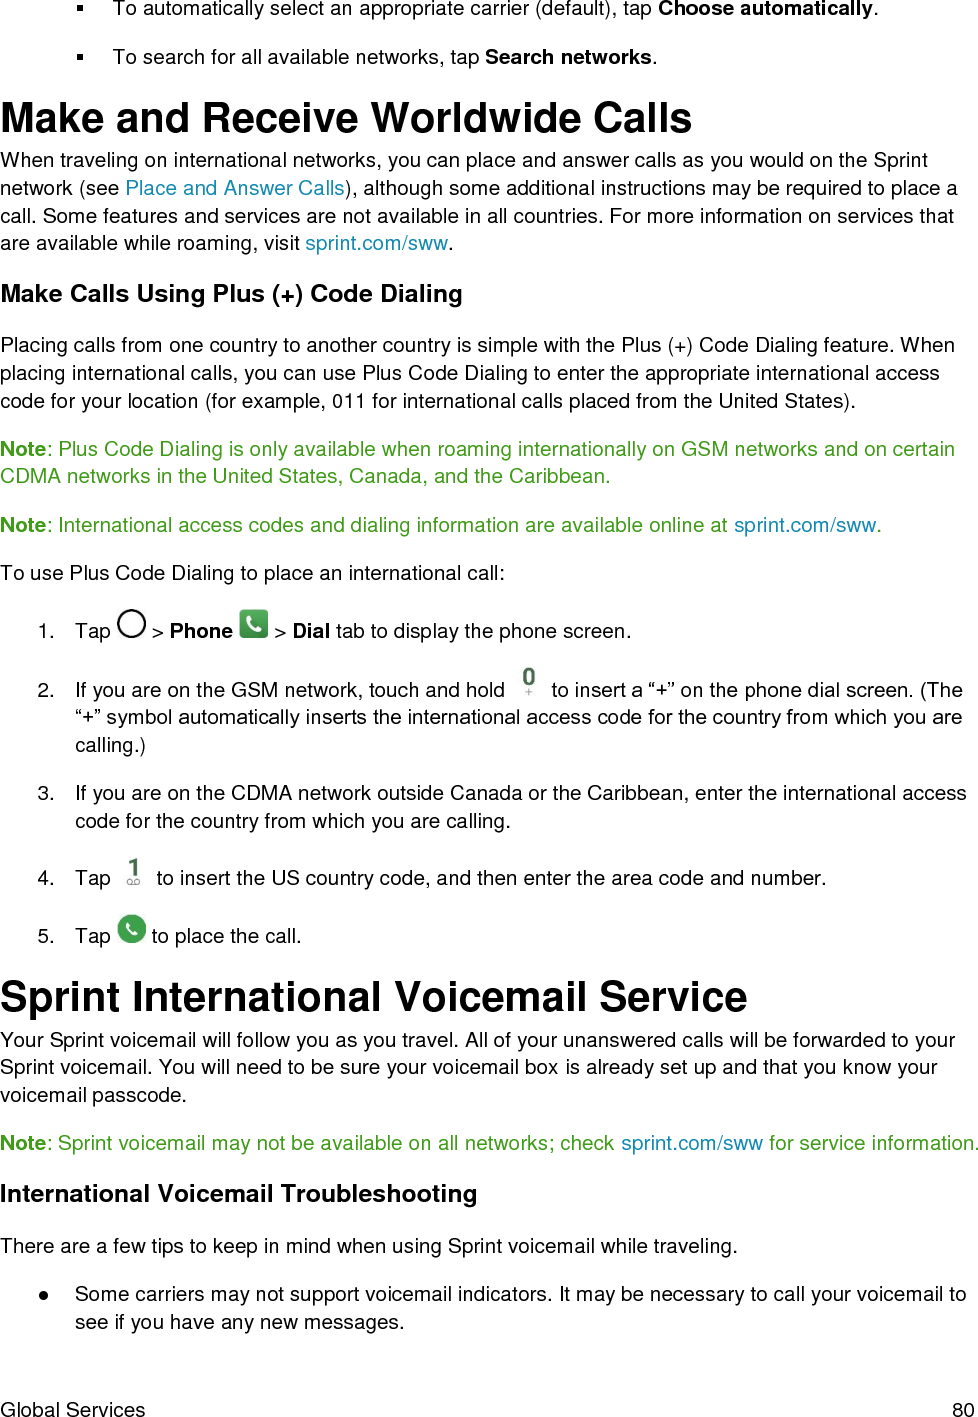  Global Services  80   To automatically select an appropriate carrier (default), tap Choose automatically.   To search for all available networks, tap Search networks. Make and Receive Worldwide Calls When traveling on international networks, you can place and answer calls as you would on the Sprint network (see Place and Answer Calls), although some additional instructions may be required to place a call. Some features and services are not available in all countries. For more information on services that are available while roaming, visit sprint.com/sww. Make Calls Using Plus (+) Code Dialing Placing calls from one country to another country is simple with the Plus (+) Code Dialing feature. When placing international calls, you can use Plus Code Dialing to enter the appropriate international access code for your location (for example, 011 for international calls placed from the United States). Note: Plus Code Dialing is only available when roaming internationally on GSM networks and on certain CDMA networks in the United States, Canada, and the Caribbean. Note: International access codes and dialing information are available online at sprint.com/sww. To use Plus Code Dialing to place an international call: 1.  Tap   &gt; Phone   &gt; Dial tab to display the phone screen. 2.  If you are on the GSM network, touch and hold   to insert a “+” on the phone dial screen. (The “+” symbol automatically inserts the international access code for the country from which you are calling.) 3.  If you are on the CDMA network outside Canada or the Caribbean, enter the international access code for the country from which you are calling. 4.  Tap   to insert the US country code, and then enter the area code and number. 5.  Tap   to place the call. Sprint International Voicemail Service Your Sprint voicemail will follow you as you travel. All of your unanswered calls will be forwarded to your Sprint voicemail. You will need to be sure your voicemail box is already set up and that you know your voicemail passcode. Note: Sprint voicemail may not be available on all networks; check sprint.com/sww for service information. International Voicemail Troubleshooting There are a few tips to keep in mind when using Sprint voicemail while traveling. ●  Some carriers may not support voicemail indicators. It may be necessary to call your voicemail to see if you have any new messages. 